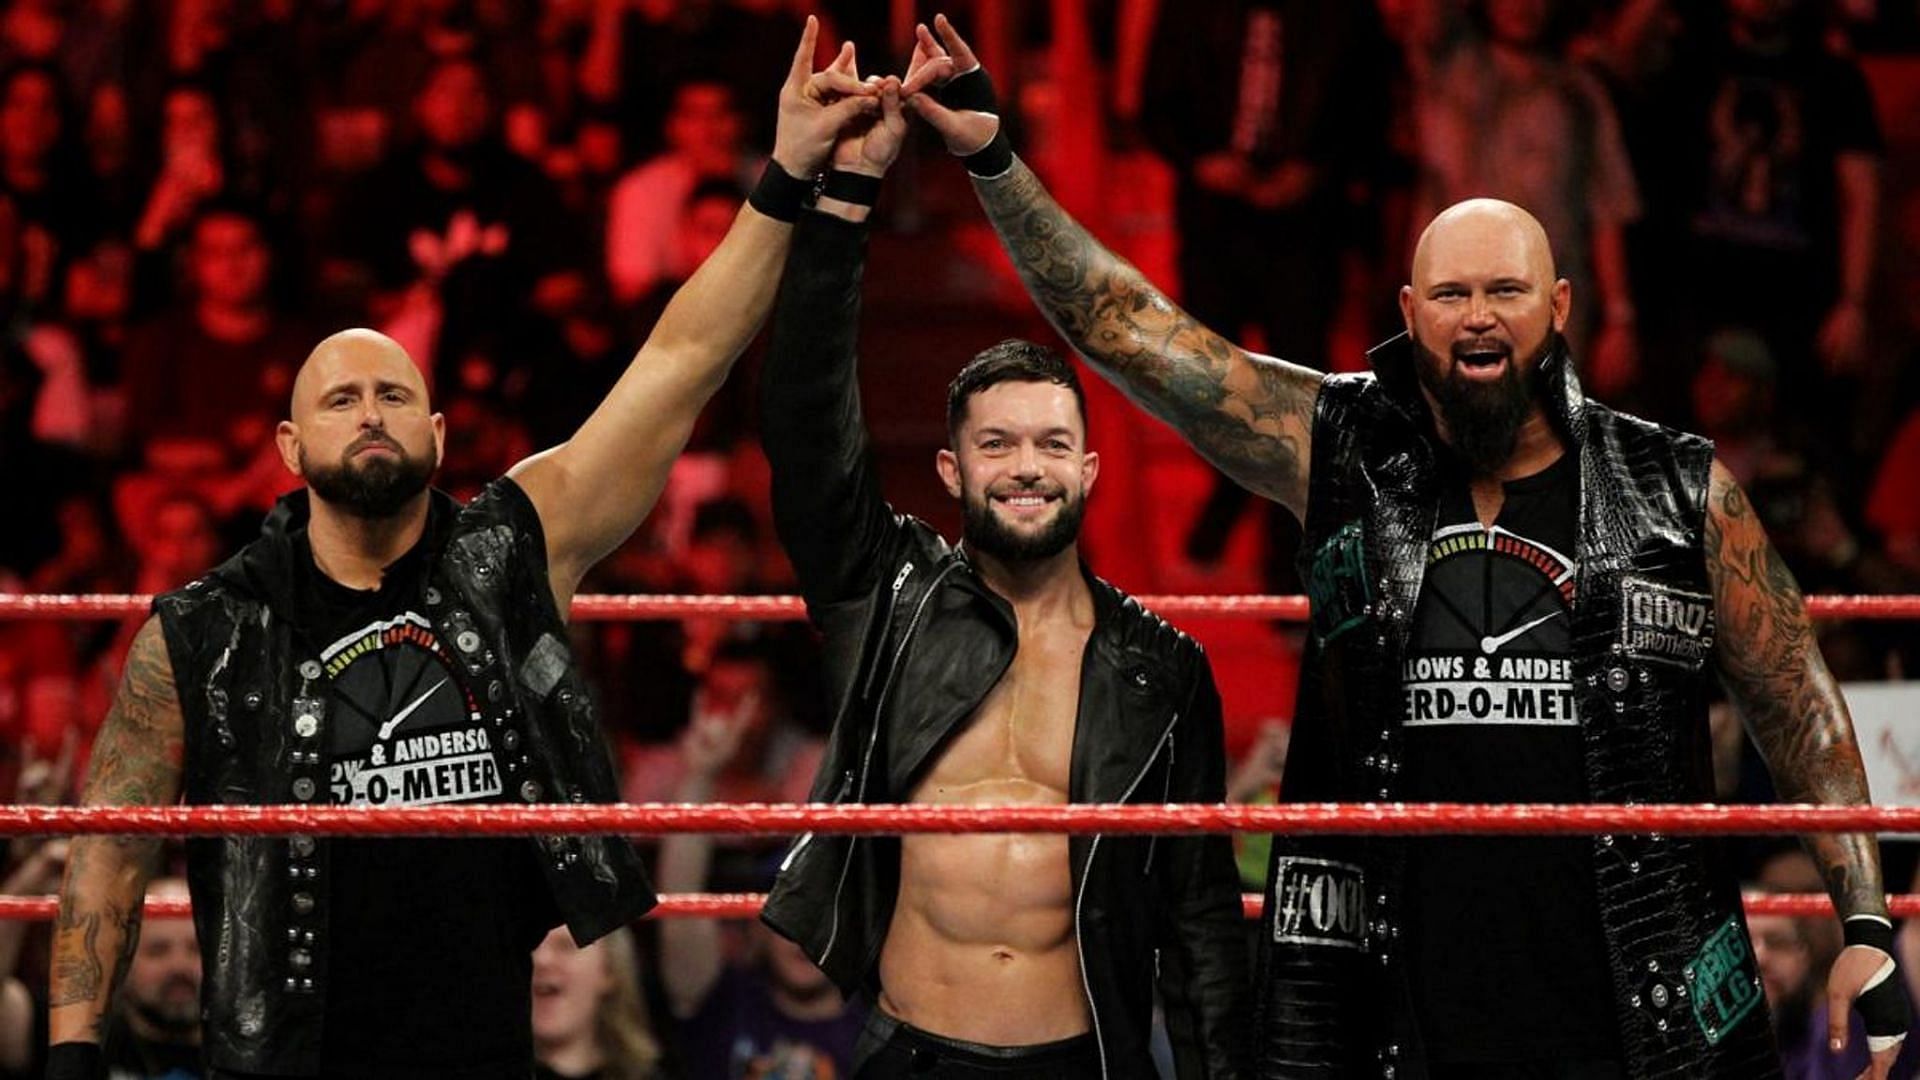 The Good Brothers and Finn Balor